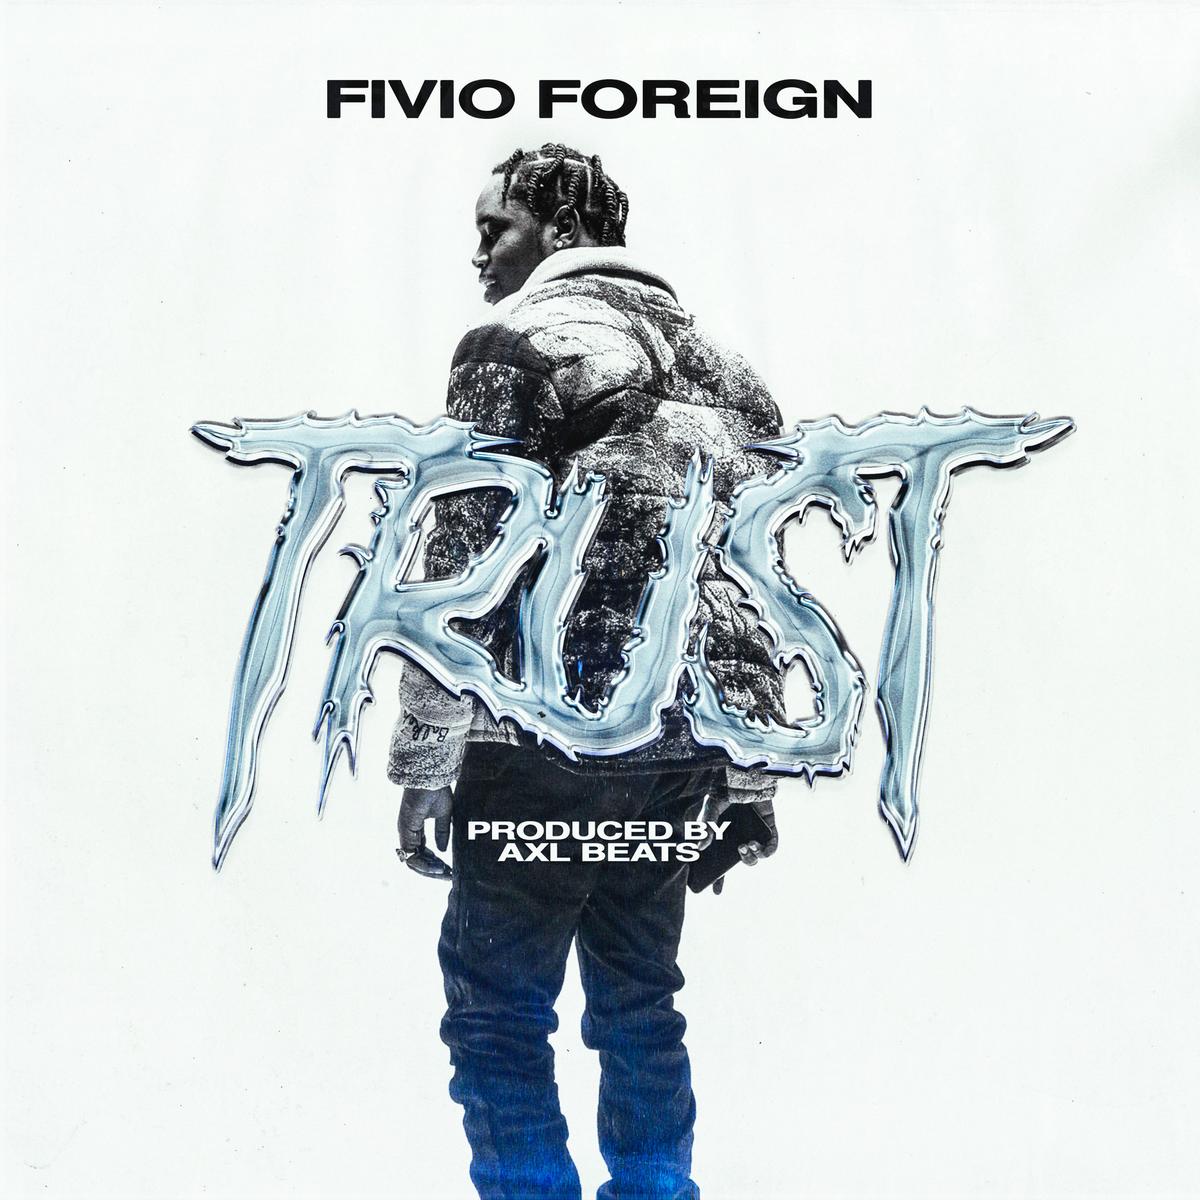 Trust - Fivio Foreign Produced By Axl Beats